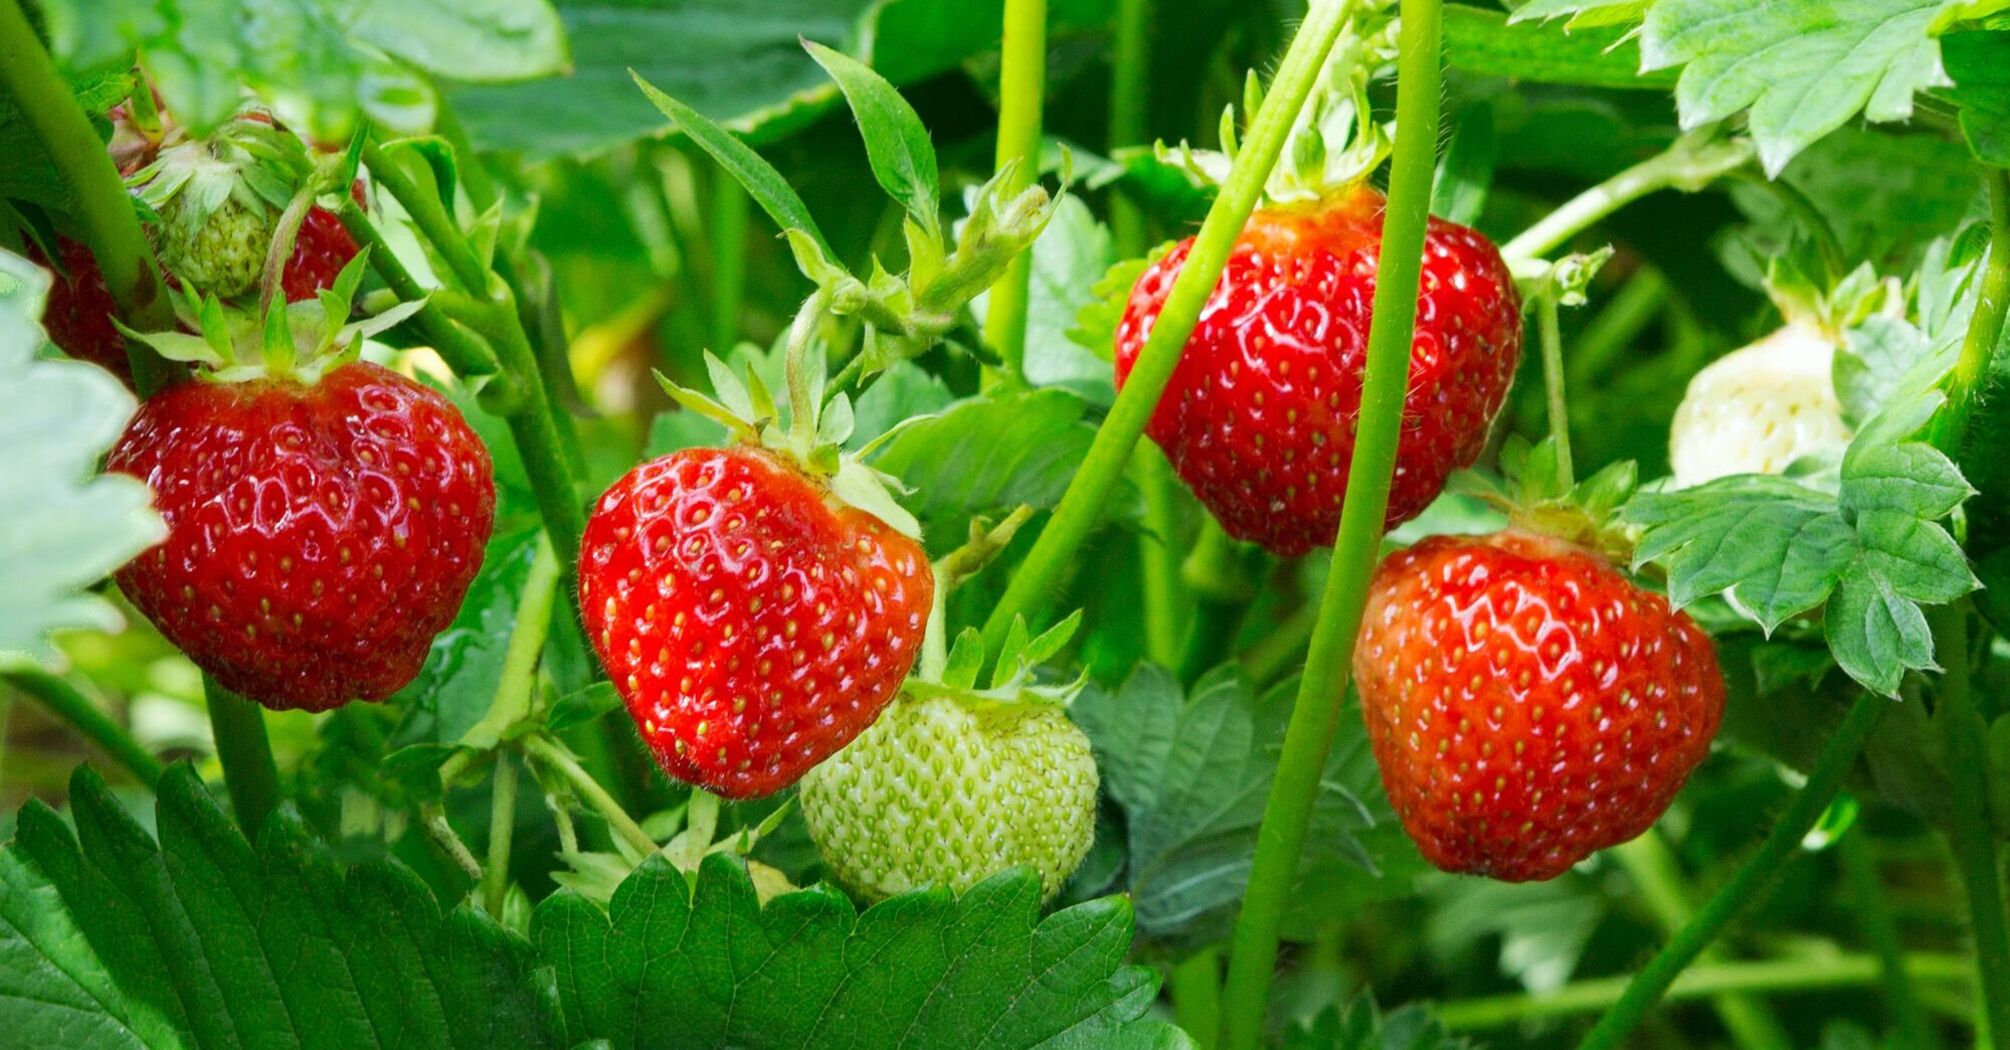 Here's what you need to fertilize strawberries in spring